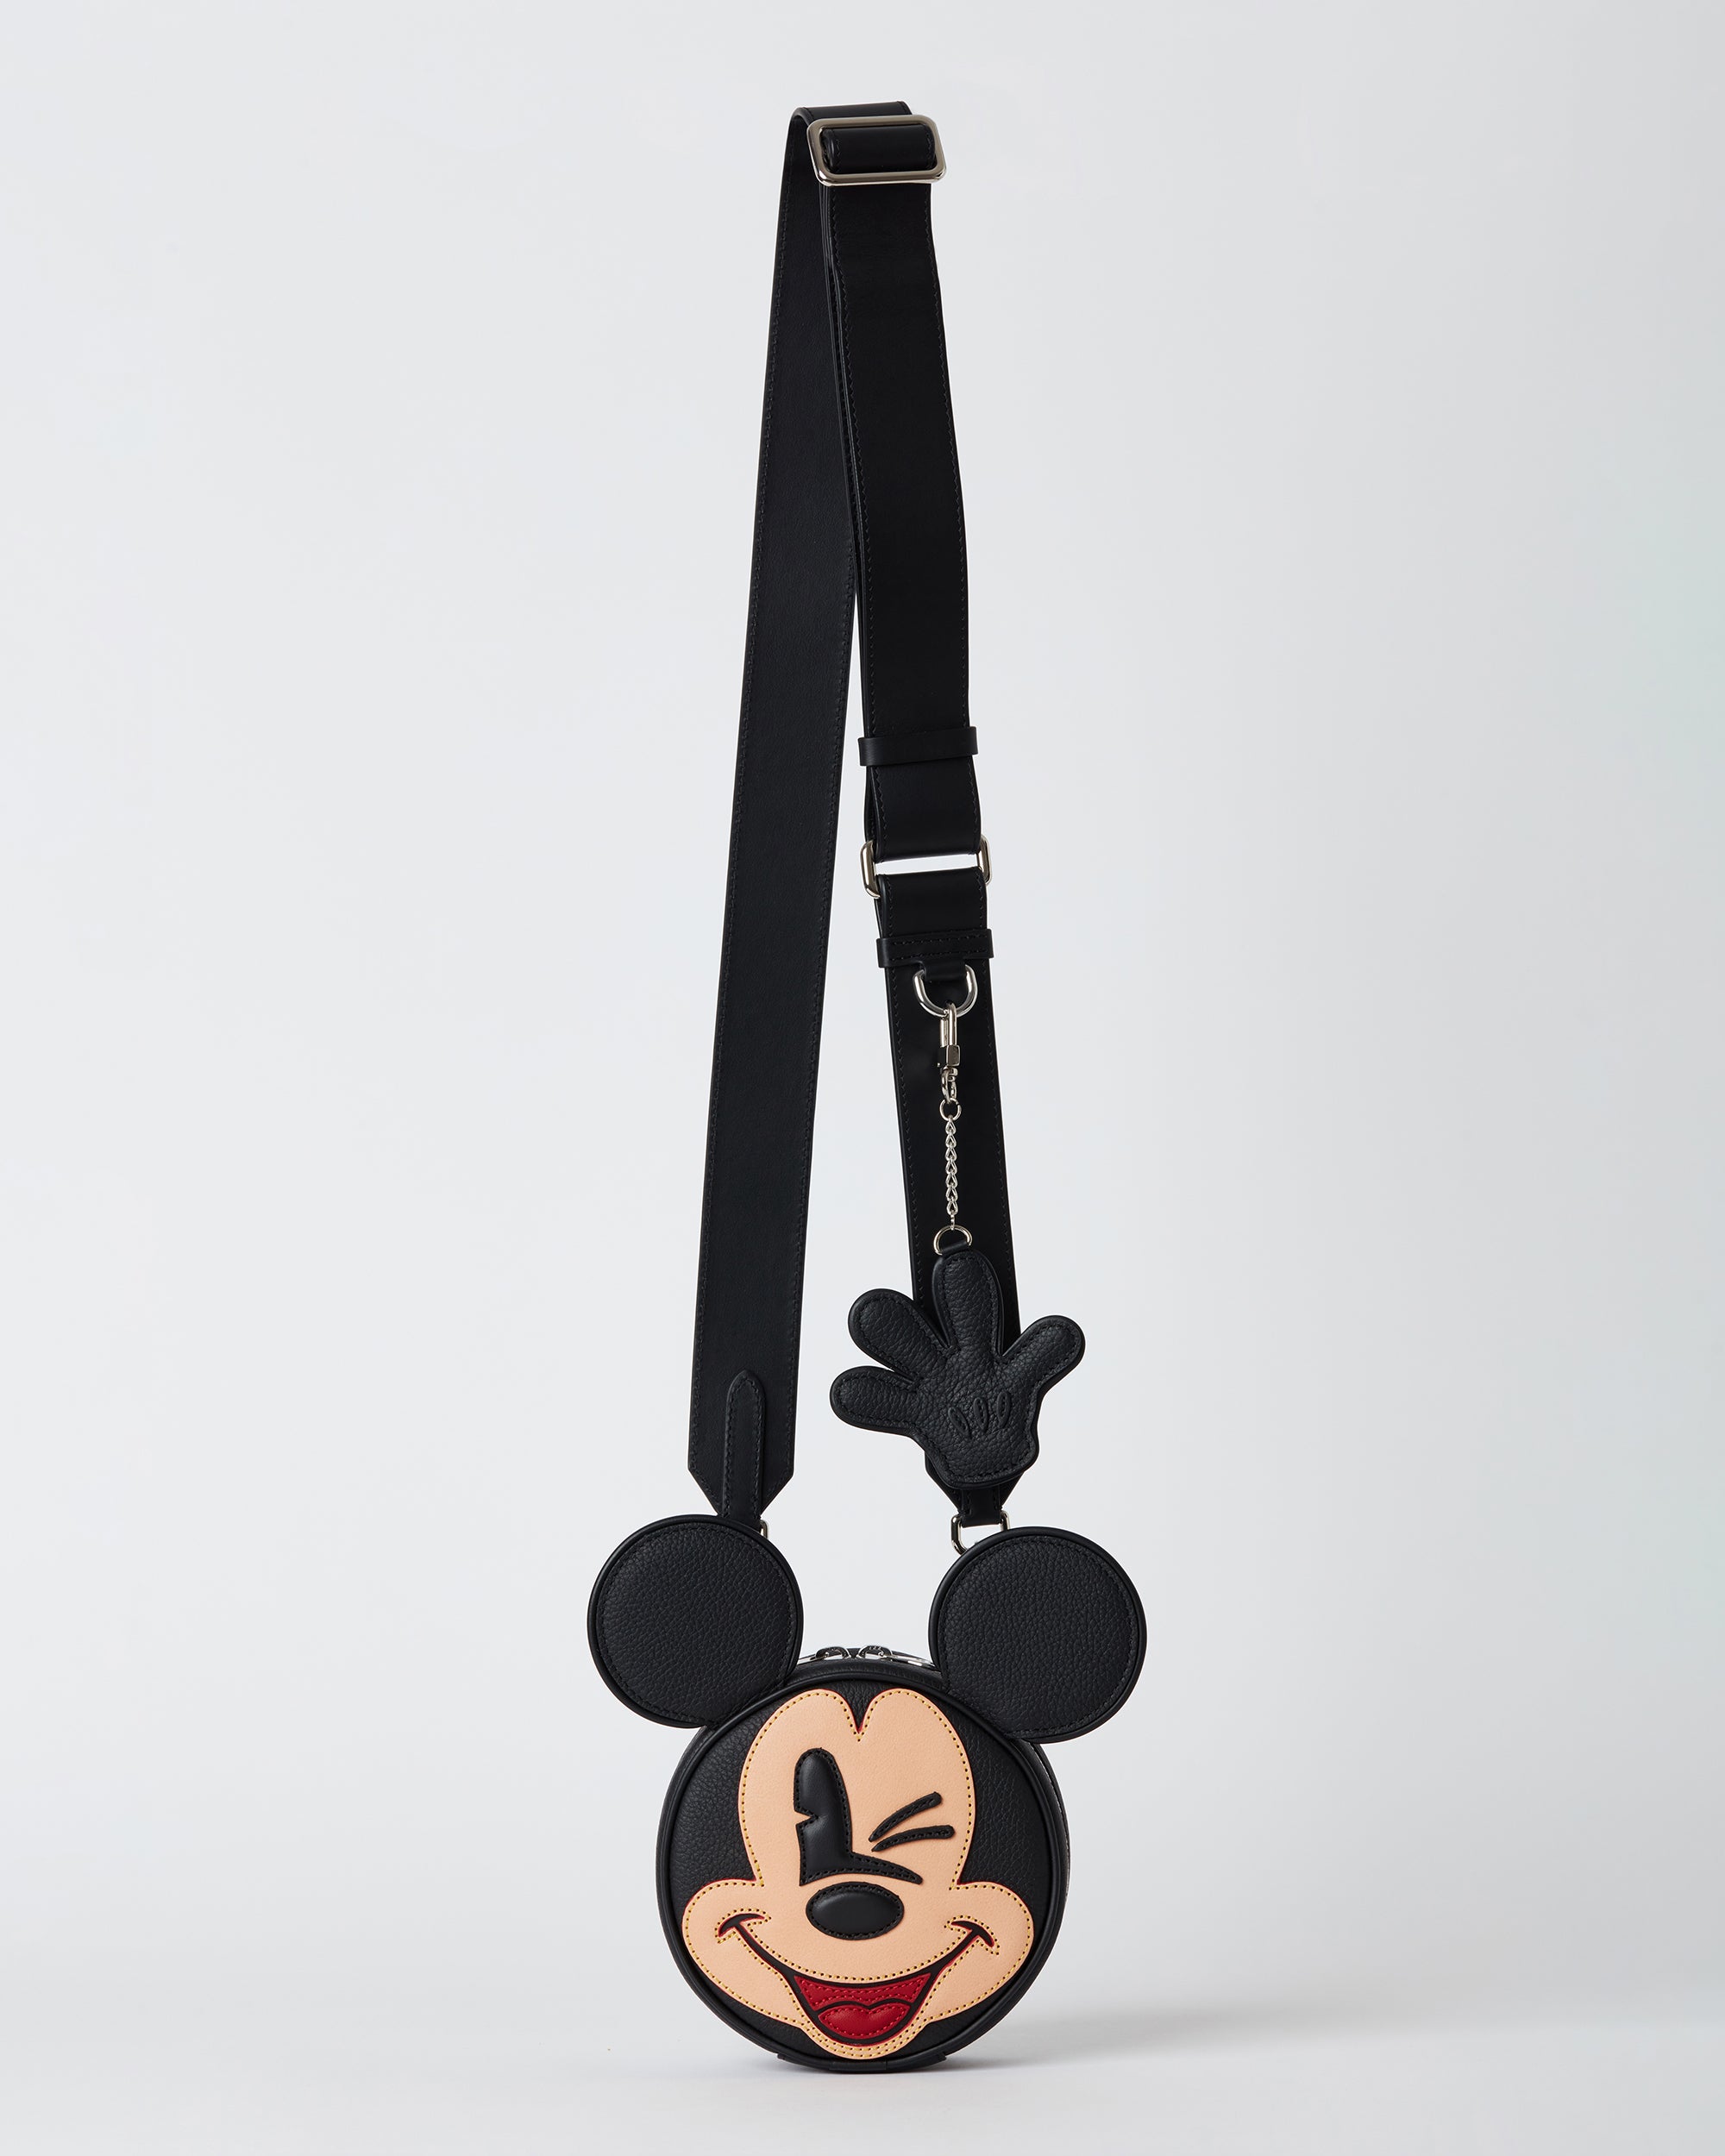 Made to Order with Sheron Barber (Minnie and Mickey edition